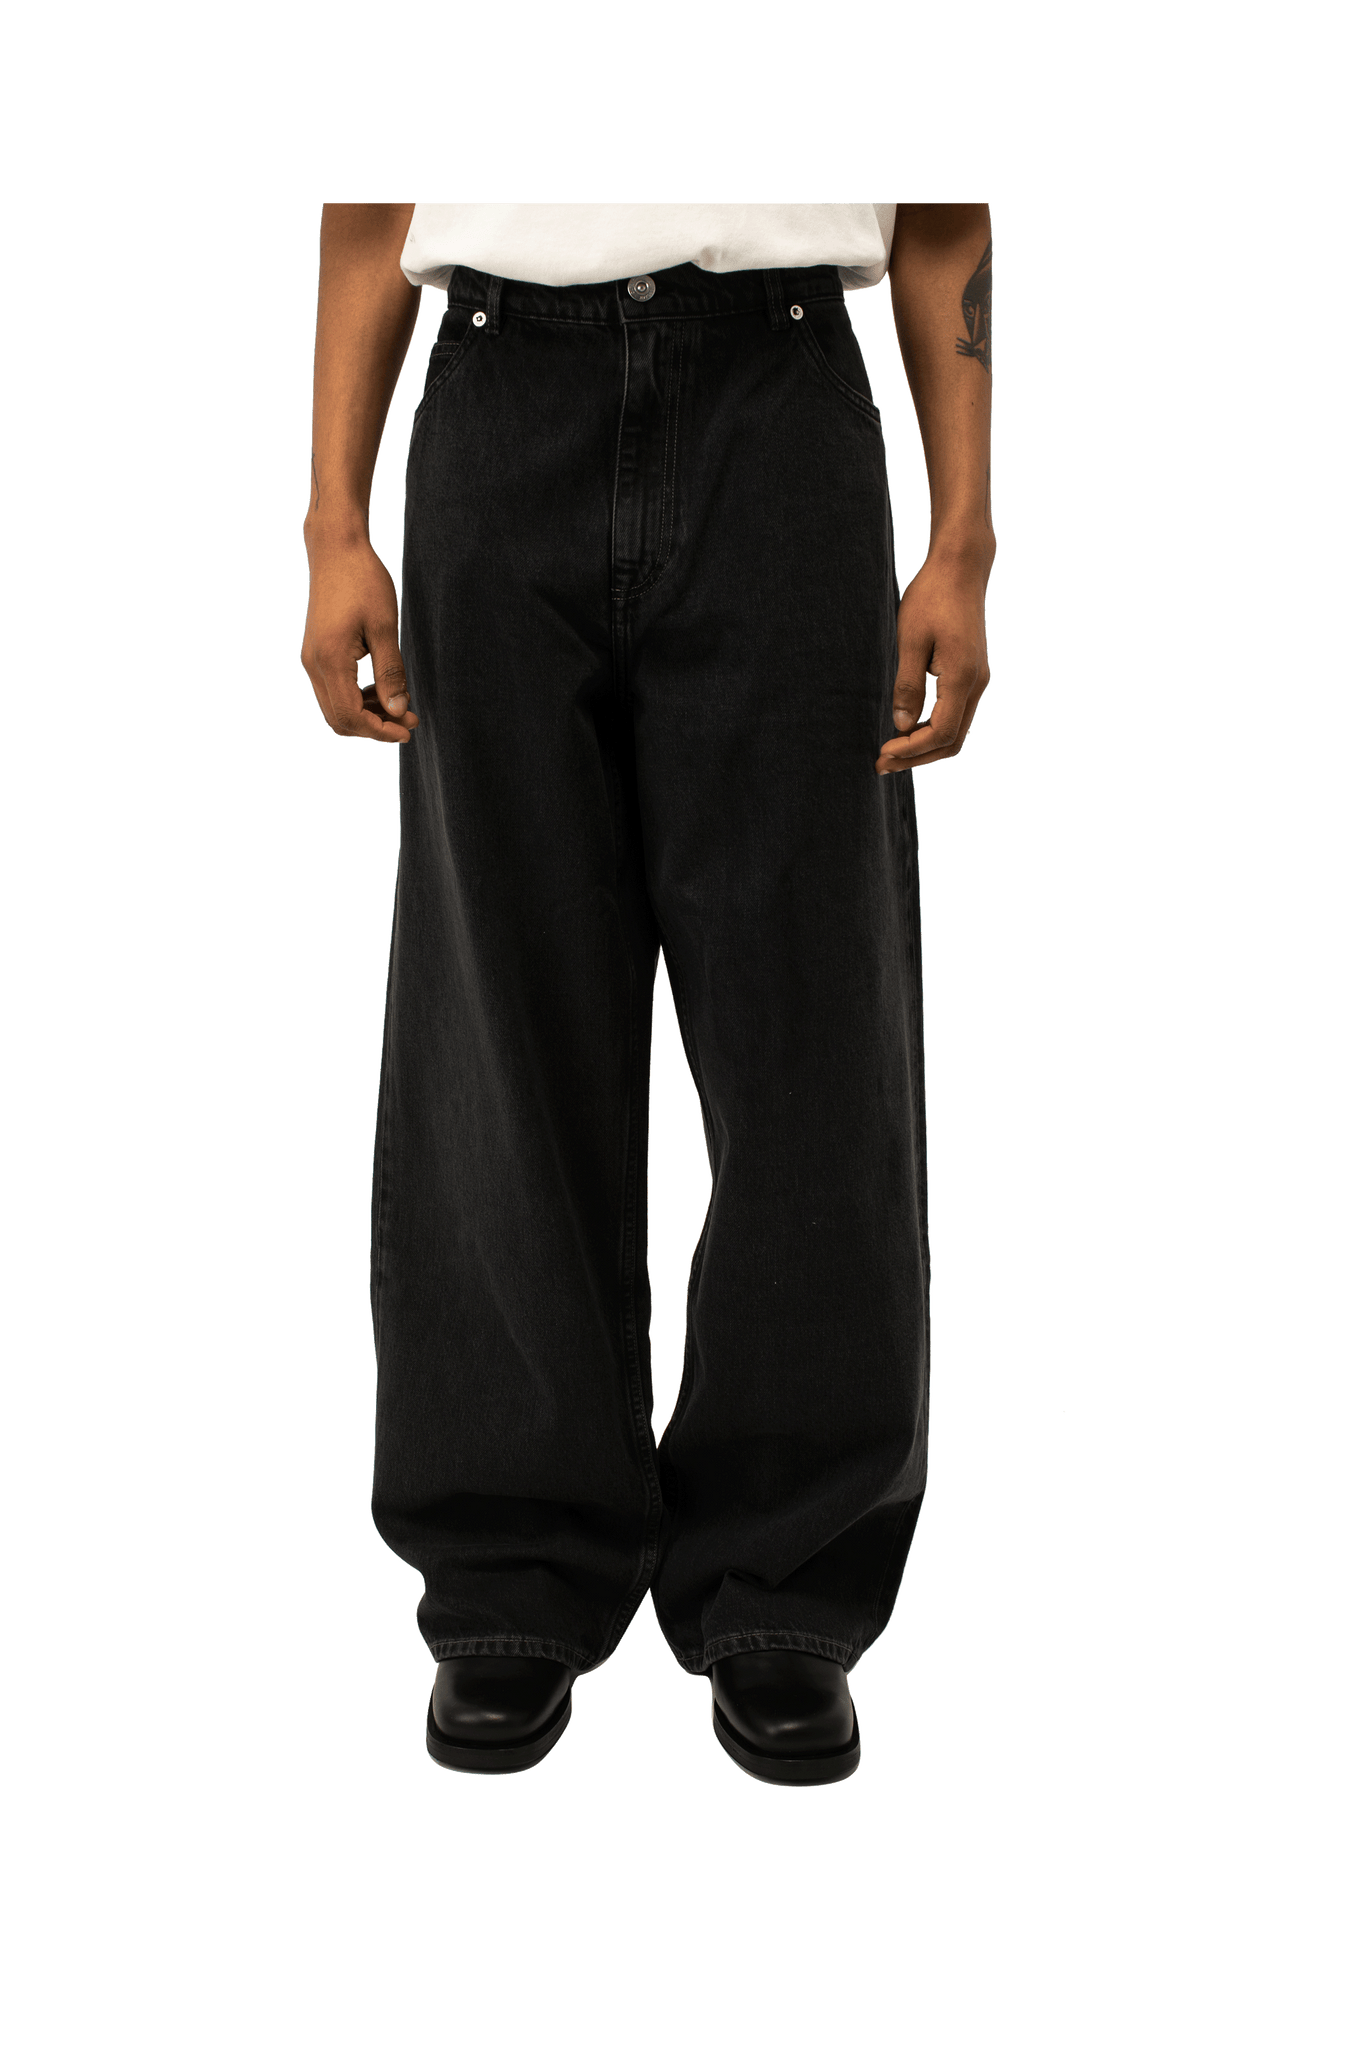 VAST STORE  The new range from DICKIES LOOSE FIT DOUBLE KNEE WORK